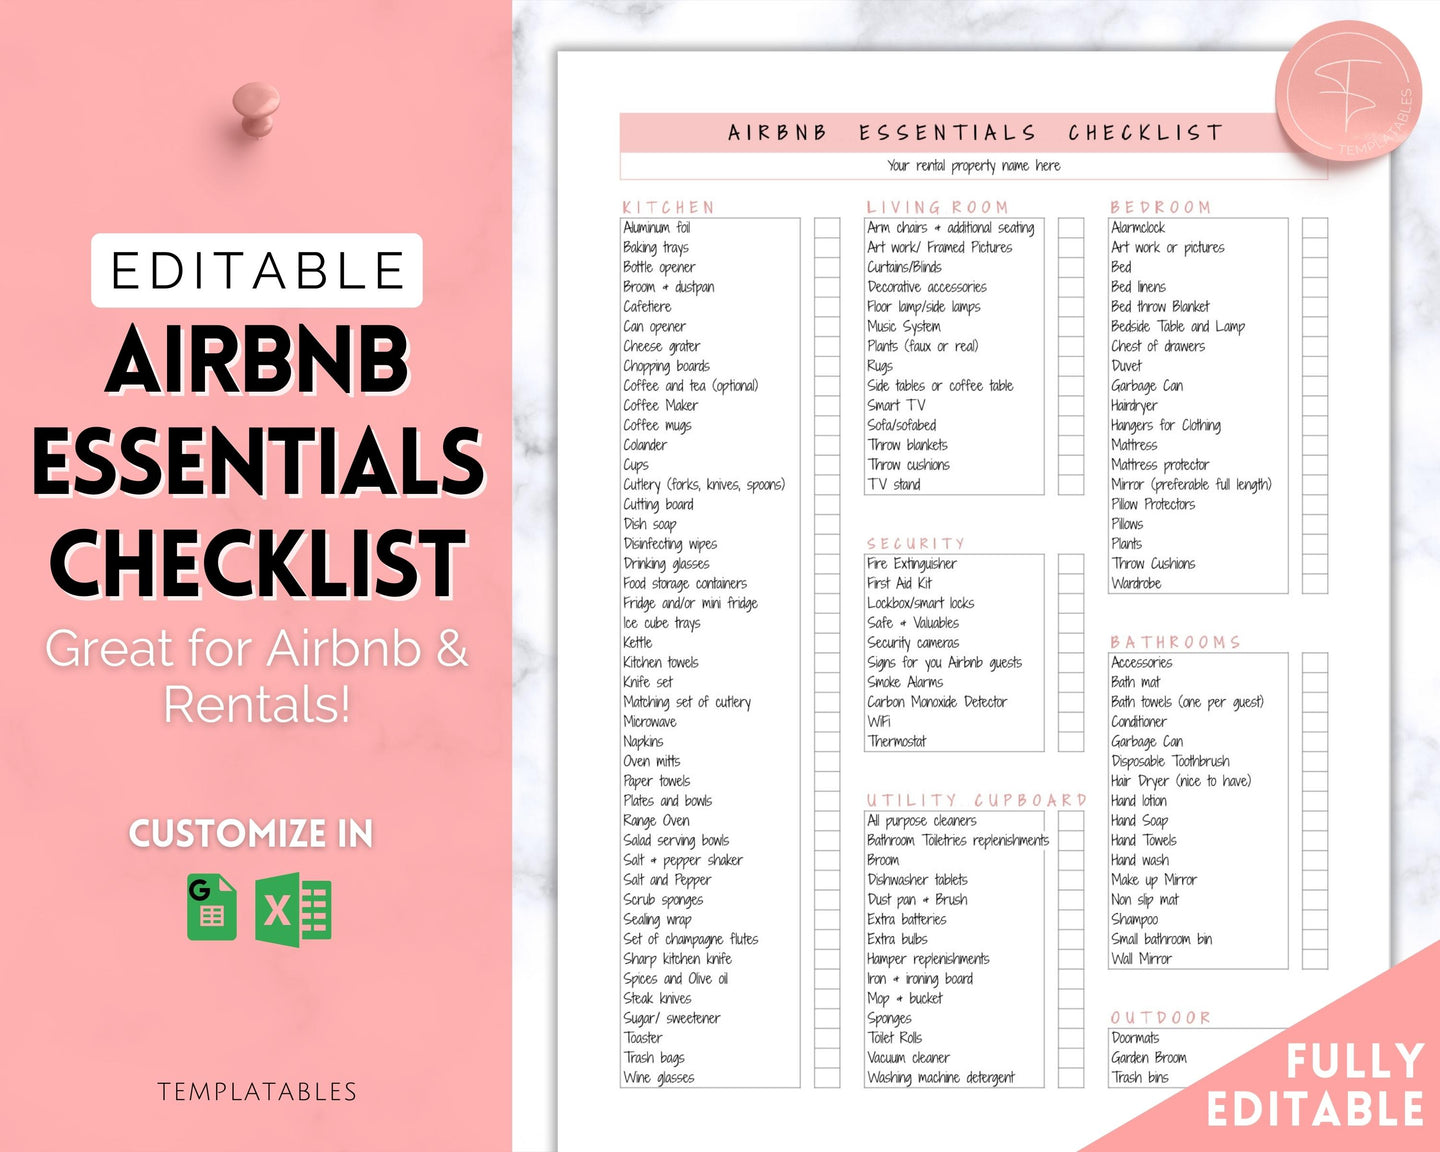 Airbnb Essentials Checklist | EDITABLE Airbnb Inventory List for Airbnb Hosts | Pink